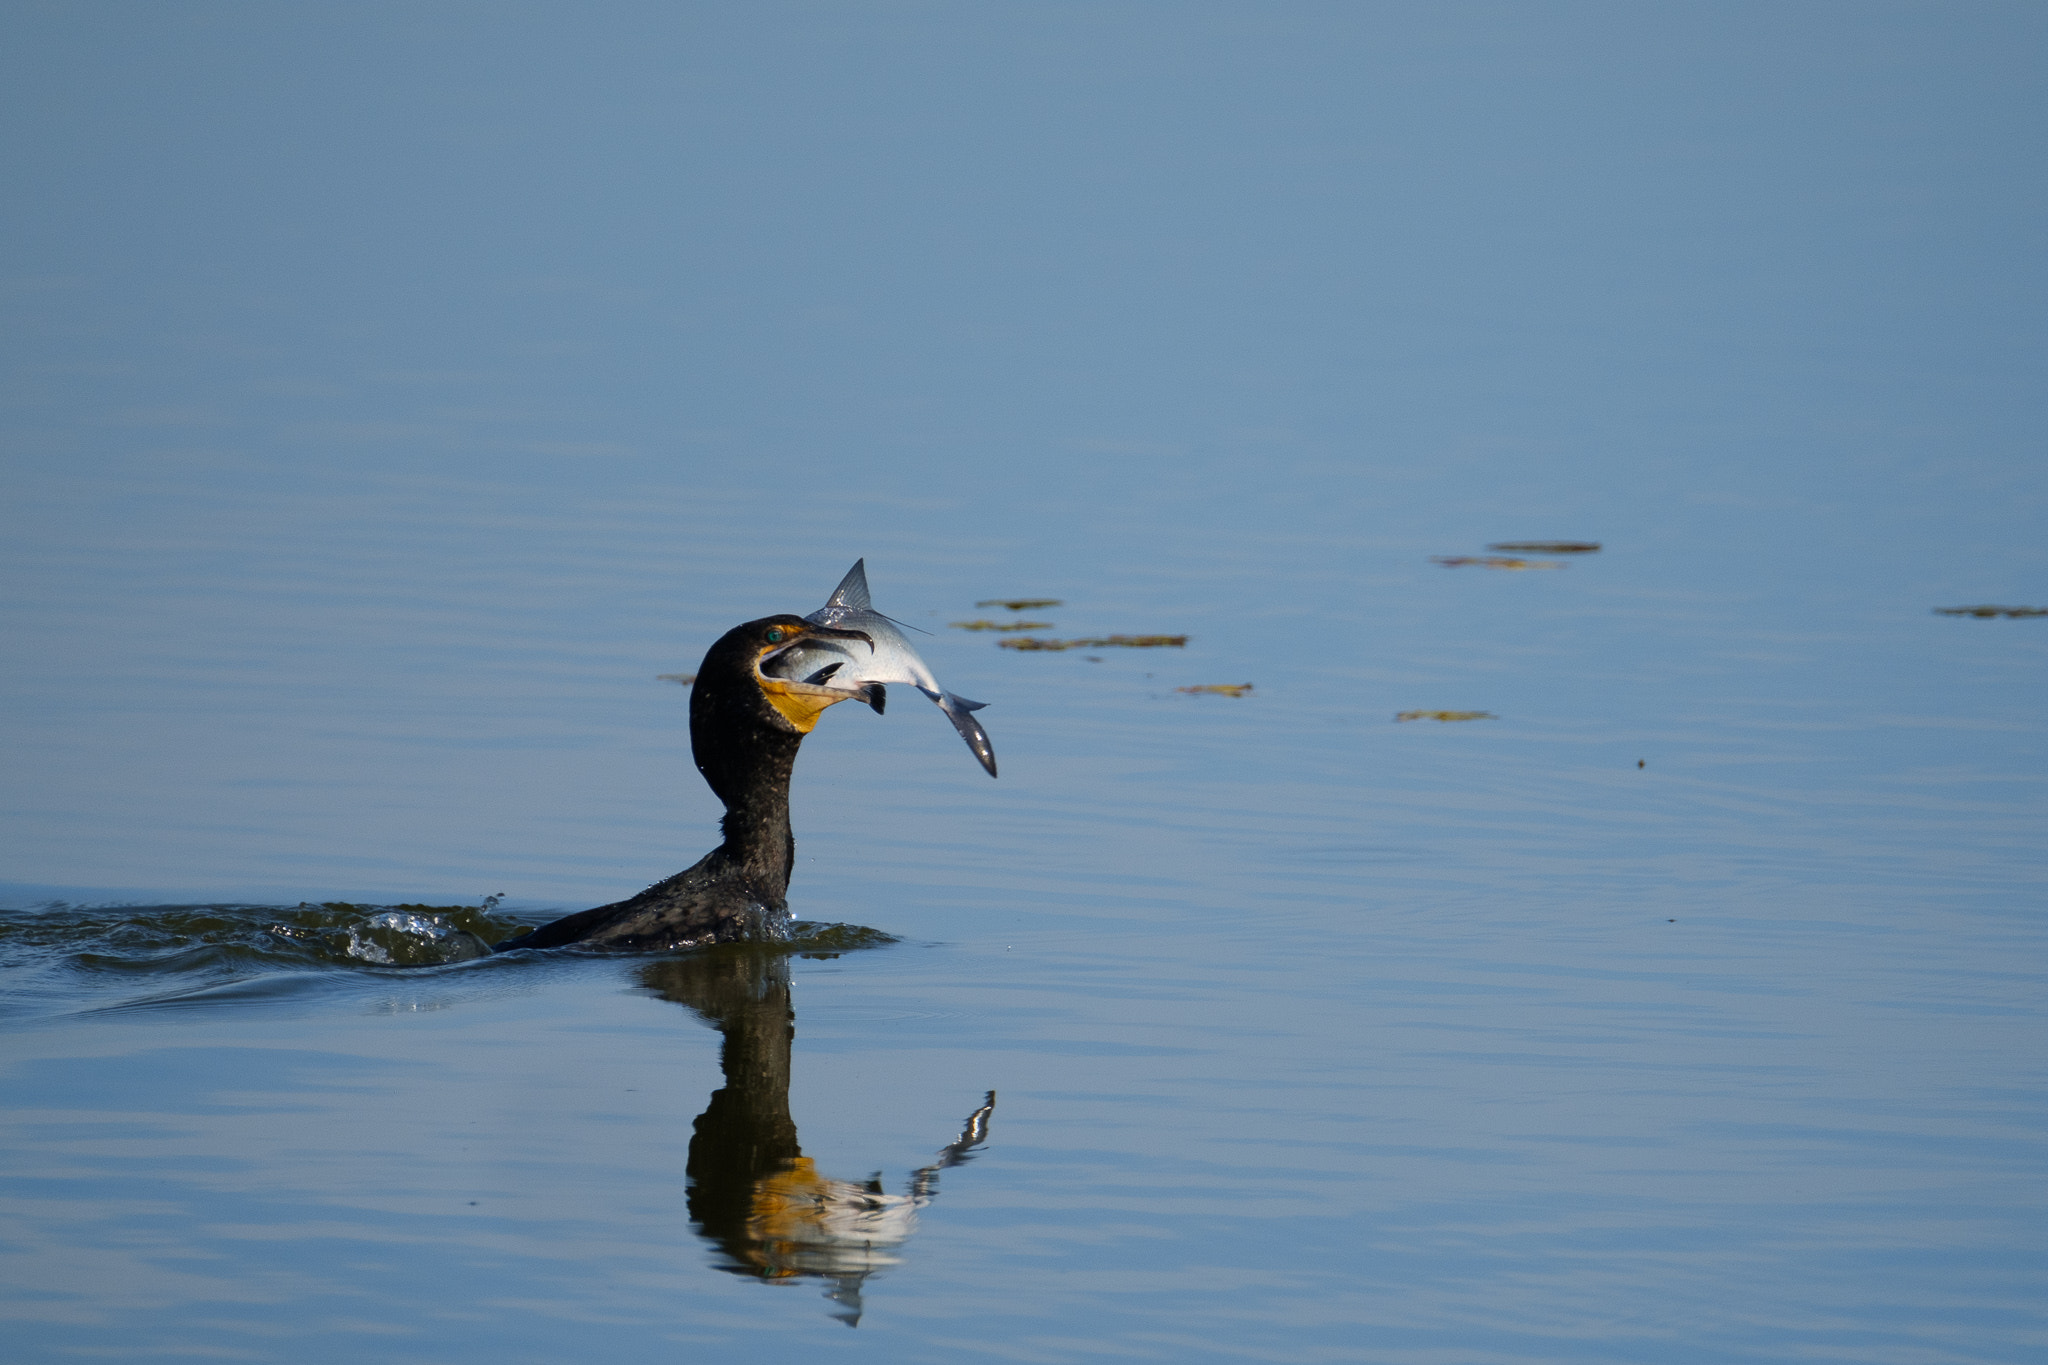 Fujifilm X-T2 + XF100-400mmF4.5-5.6 R LM OIS WR + 1.4x sample photo. Double-crested cormorant photography